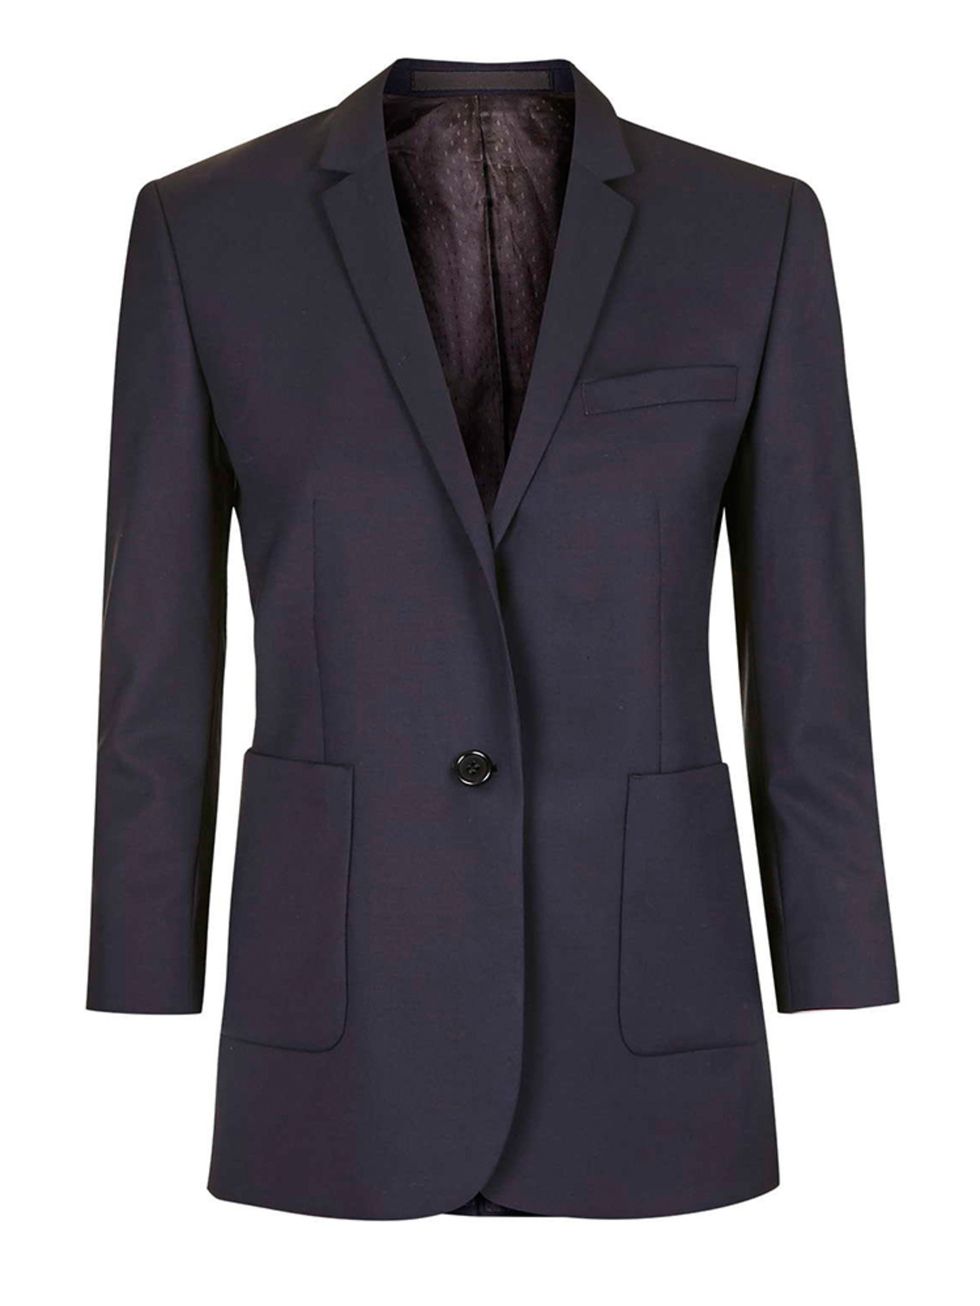 <p>A boyish, looser-fitting suit still looks smart but is much more modern (and bonus points for being so comfortable)</p>

<p>Blazer, £85, <a href="http://www.topshop.com/webapp/wcs/stores/servlet/ProductDisplay?Ntt=suit&storeId=12556&productId=21465702&